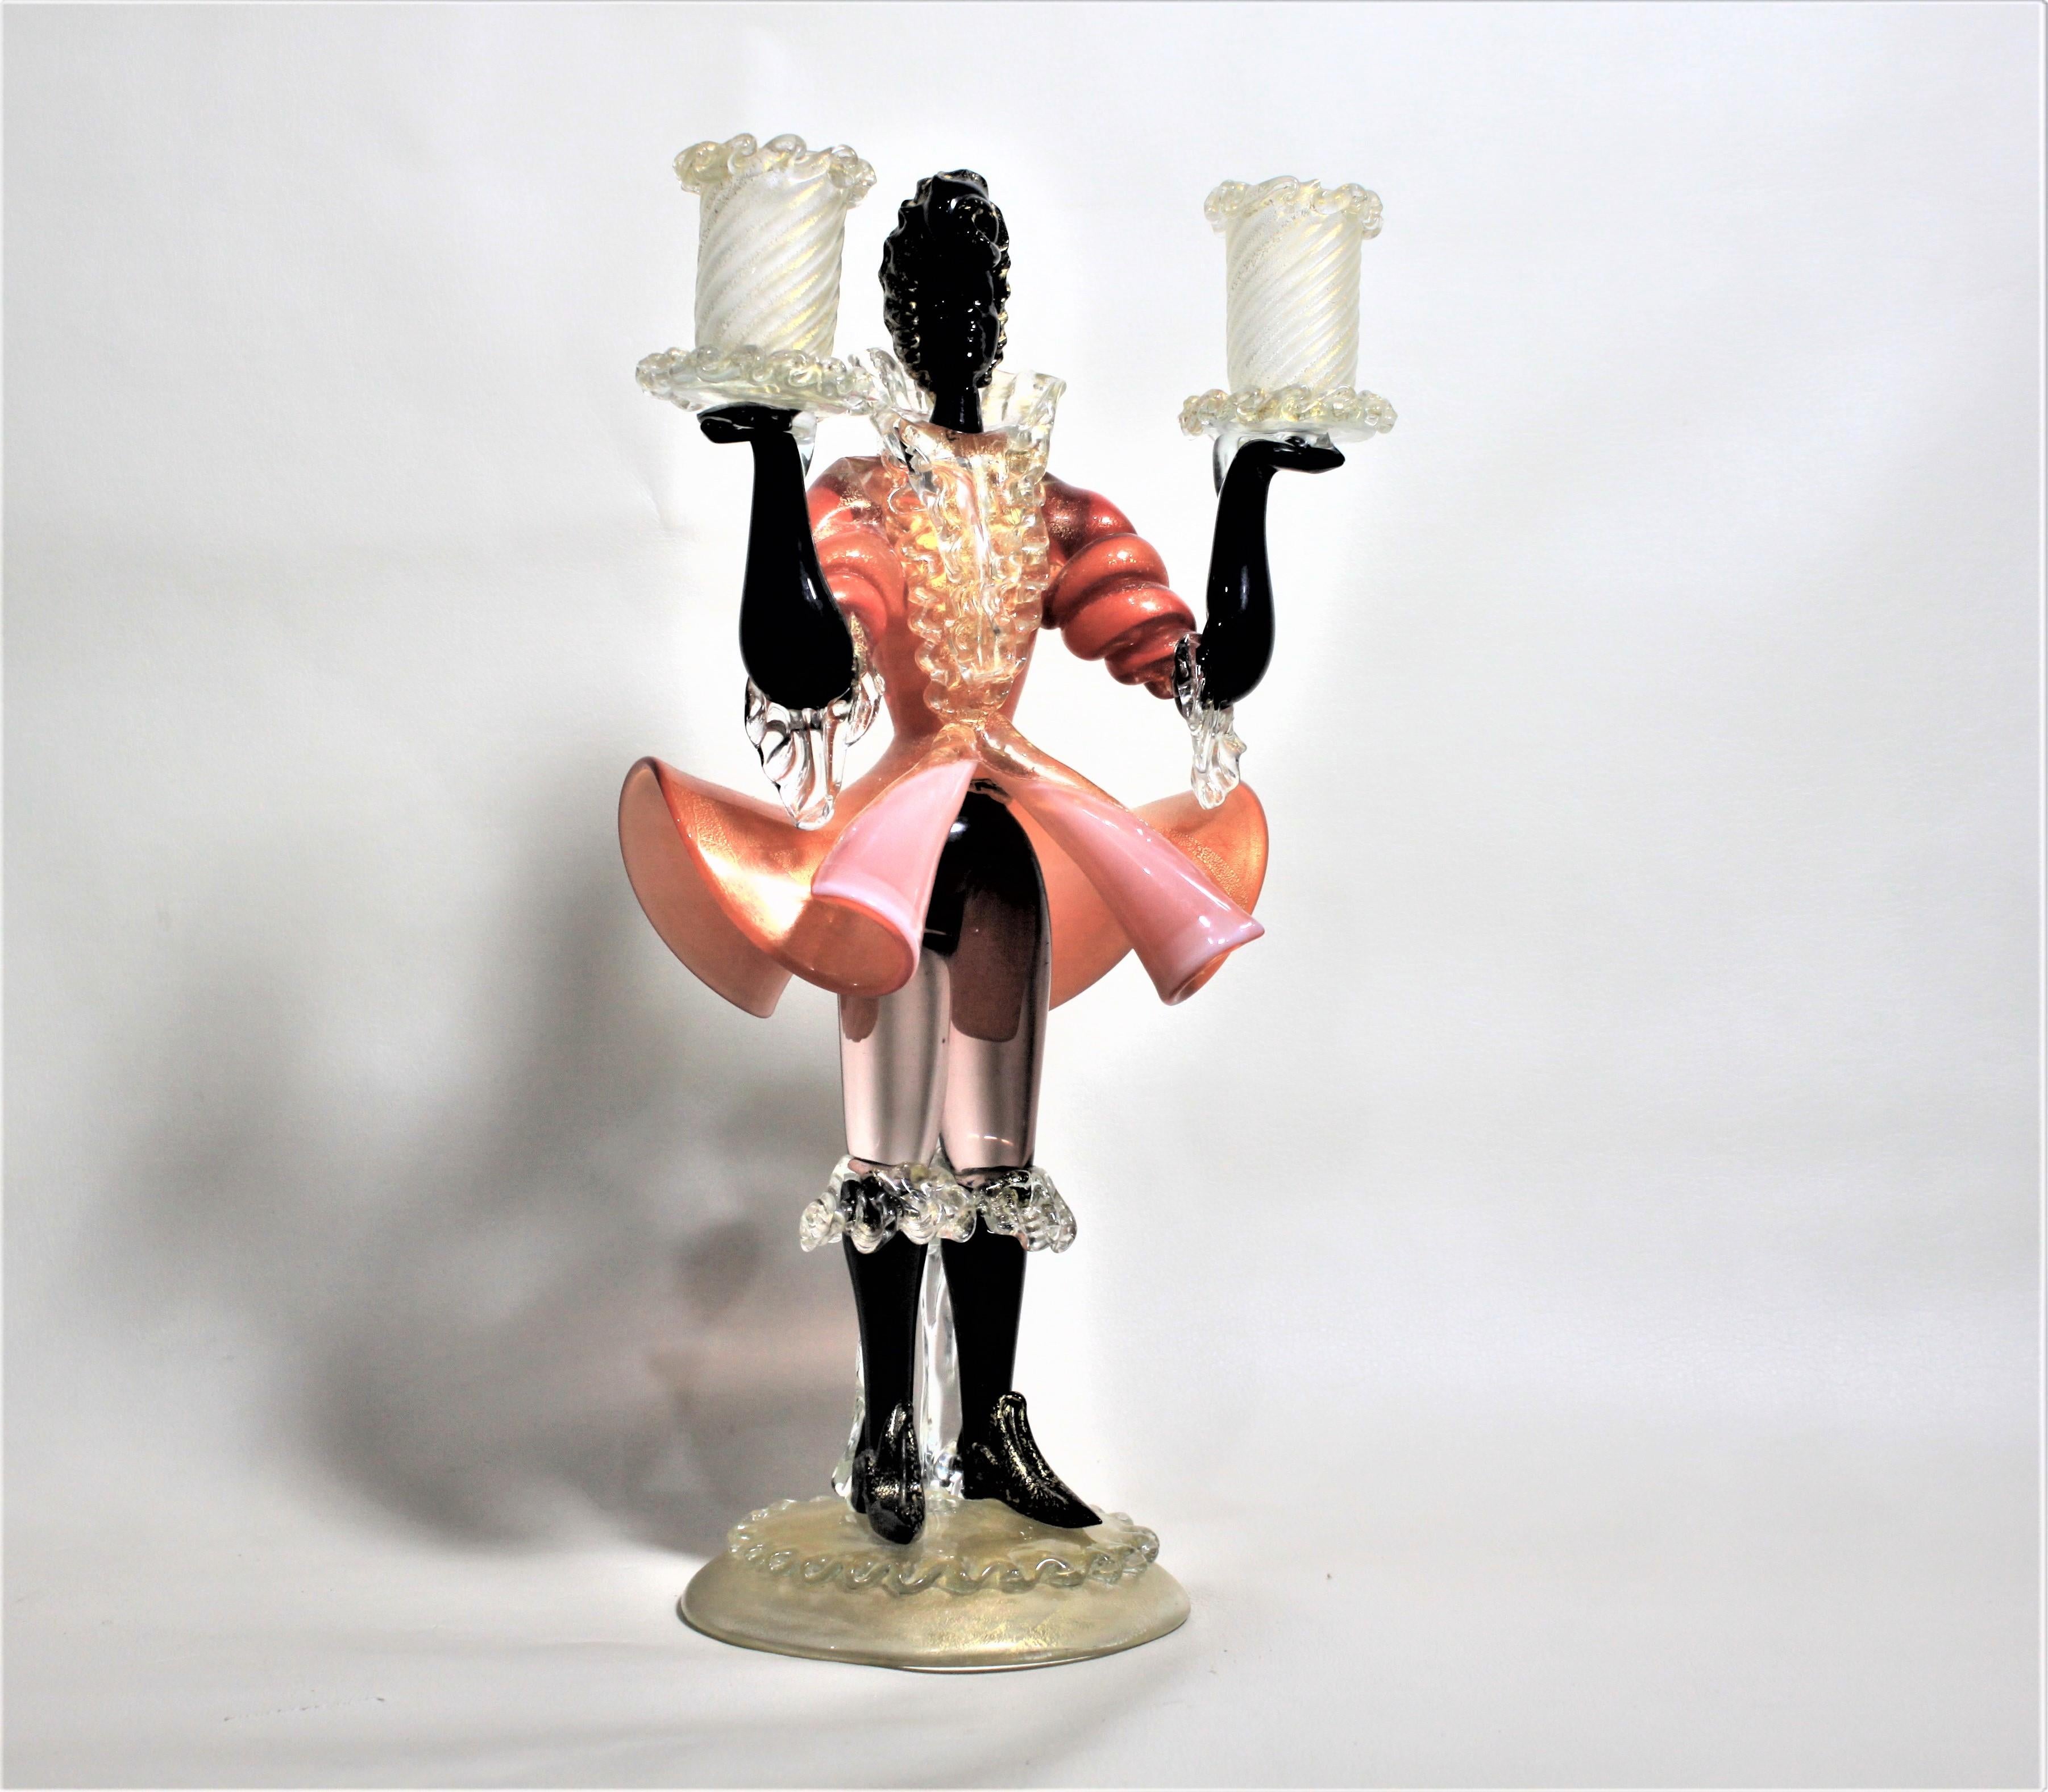 This midcentury Murano art glass candlestick is unmarked but most likely made by Barovier. The candlestick is a figural servant dressed in the high fashion of the French Renaissance period with outstretched arms holding a candle with each arm. The